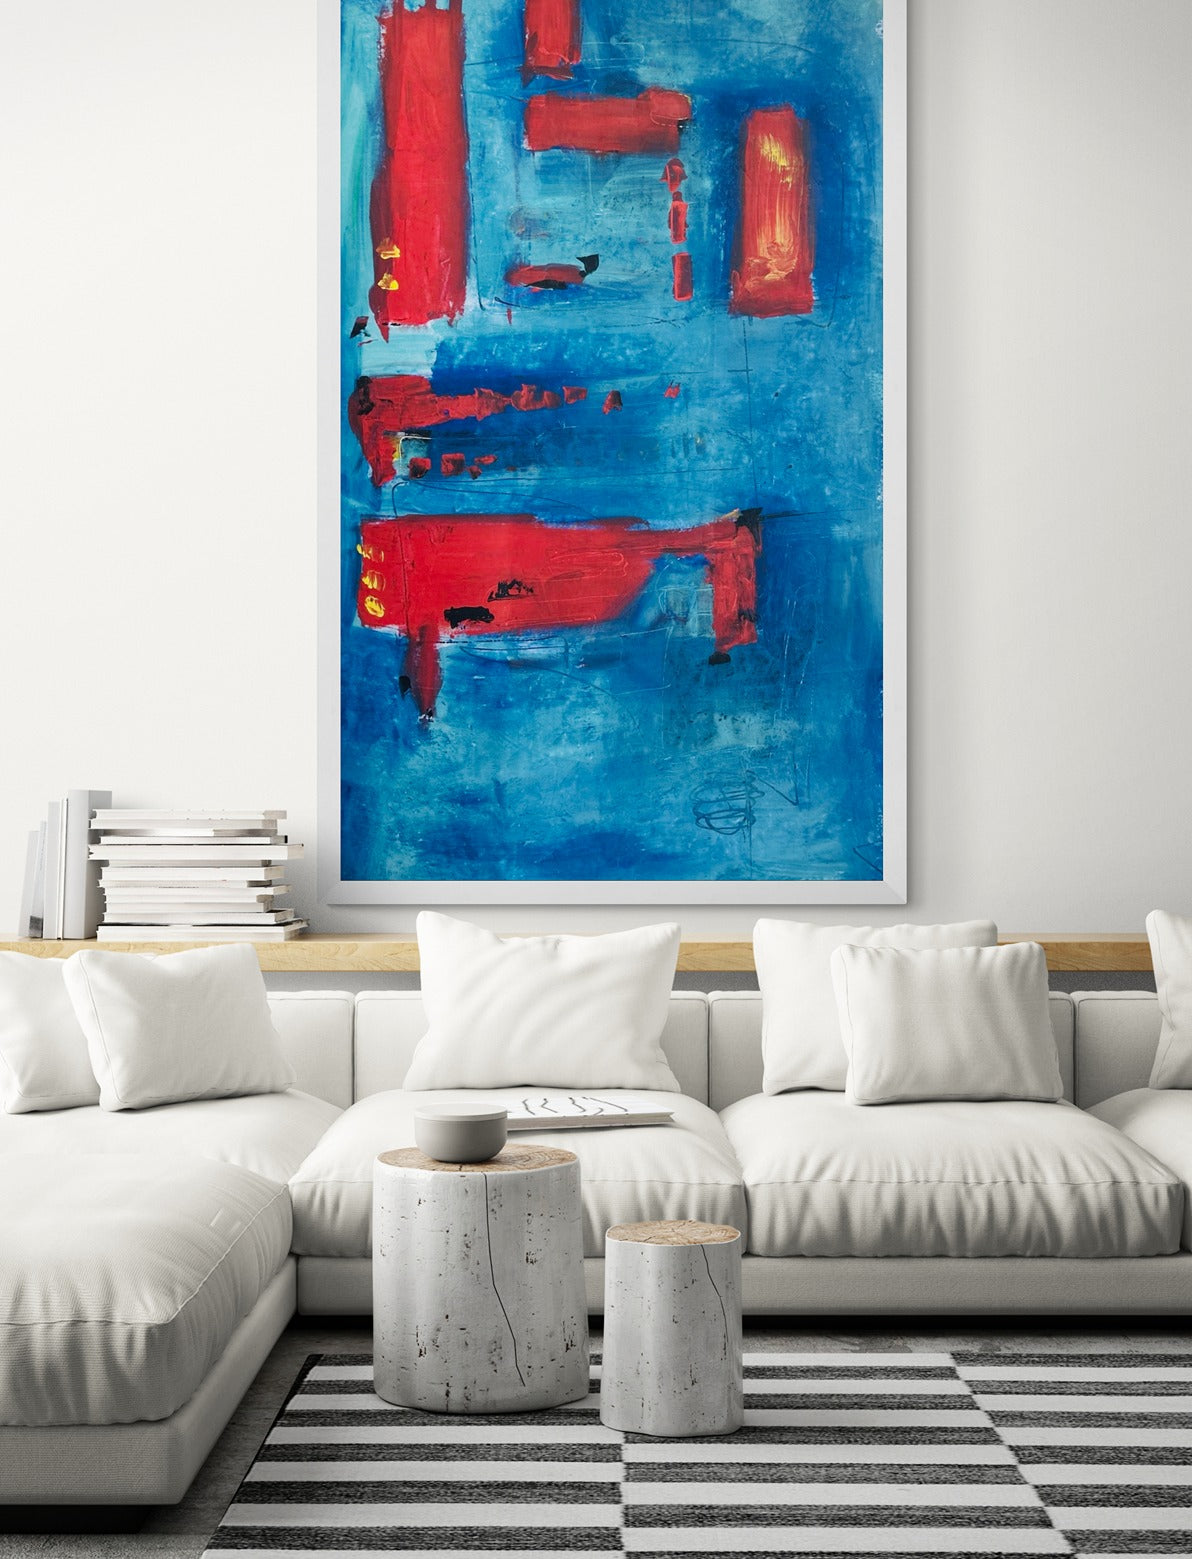 Lounge with corner sofa and tree stump pedestals featuring large canvas abstract wall art.